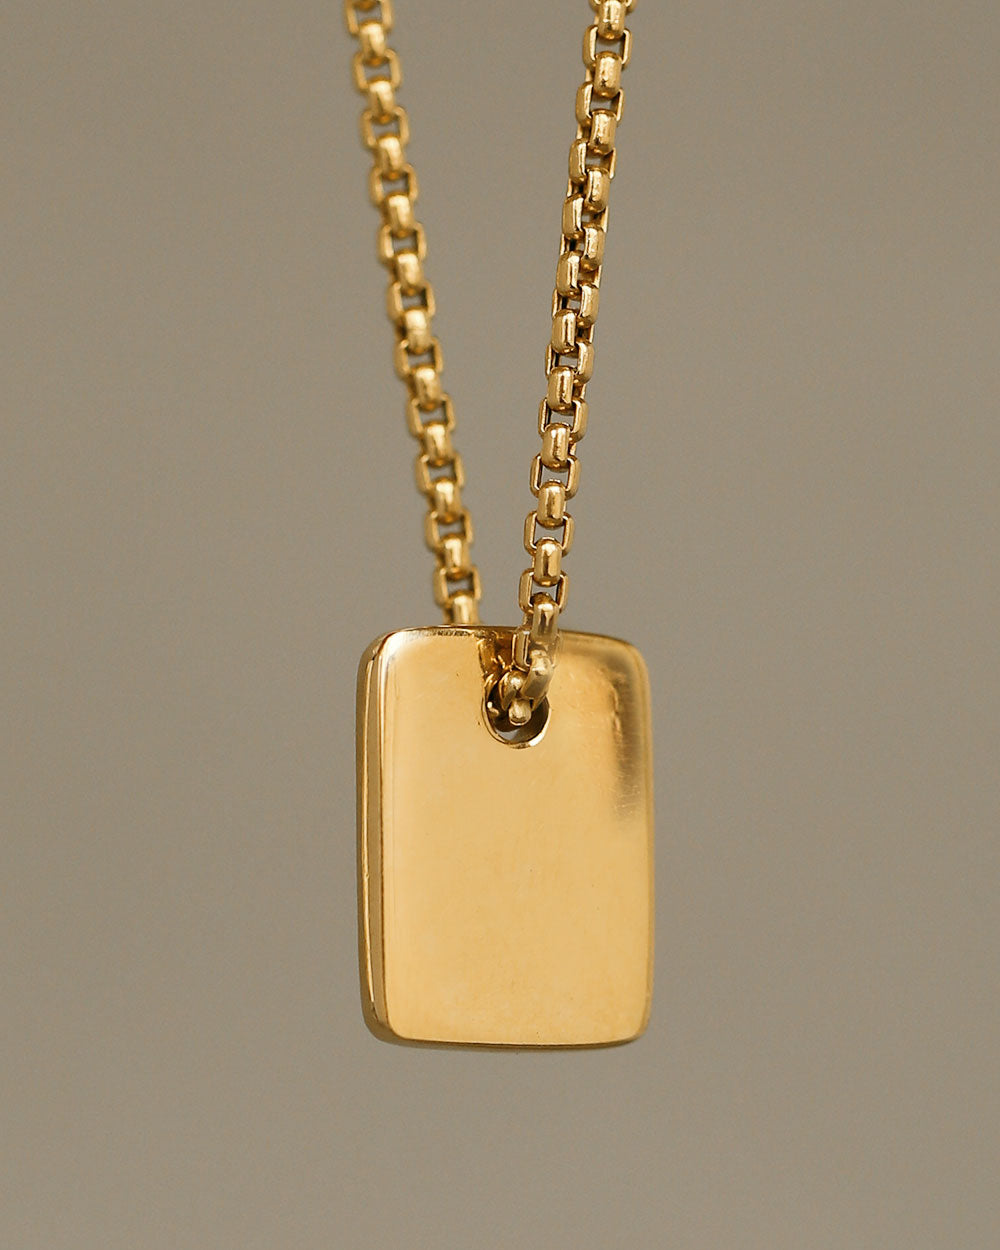 Gold Luggage Tag necklace by Carol Leskanic and George Rings 14k round box chain